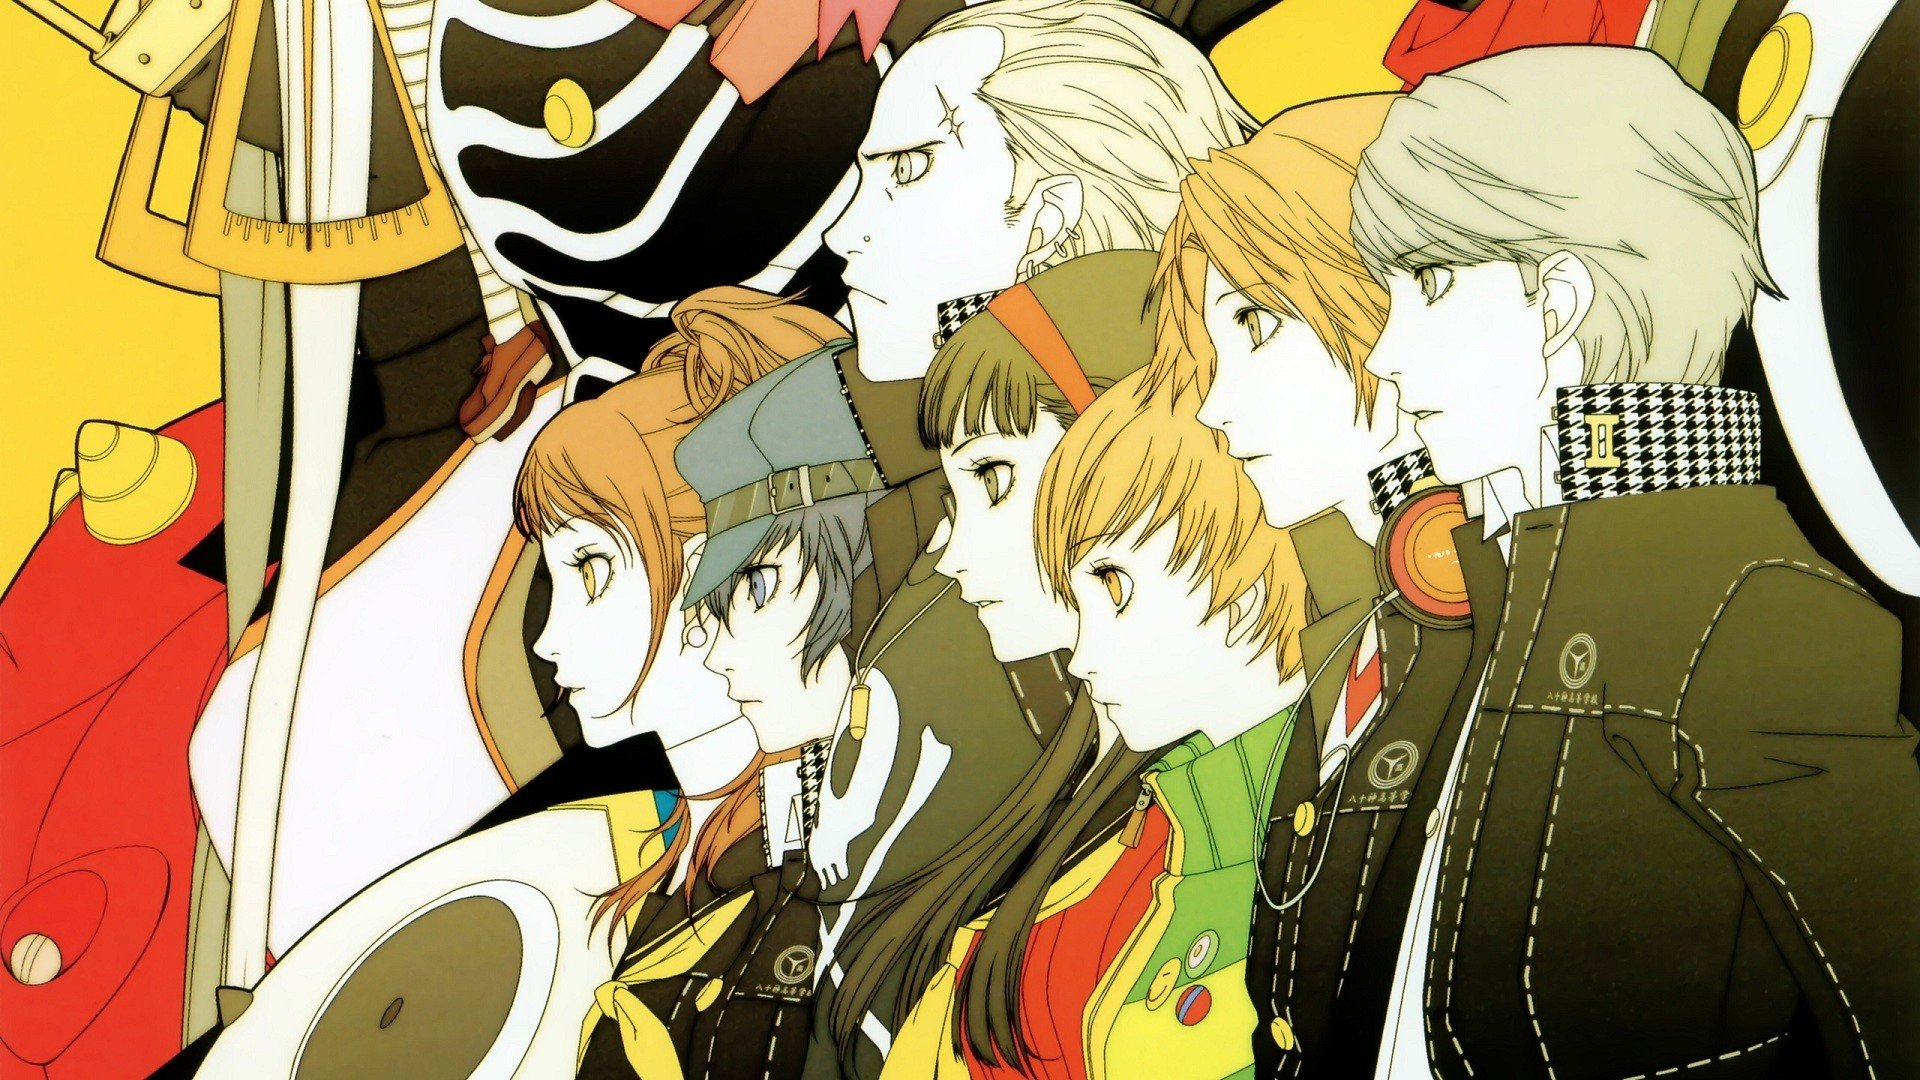 1920x1080 Cool Persona 4 Wallpapers Top Free Cool Persona 4 Backgrounds